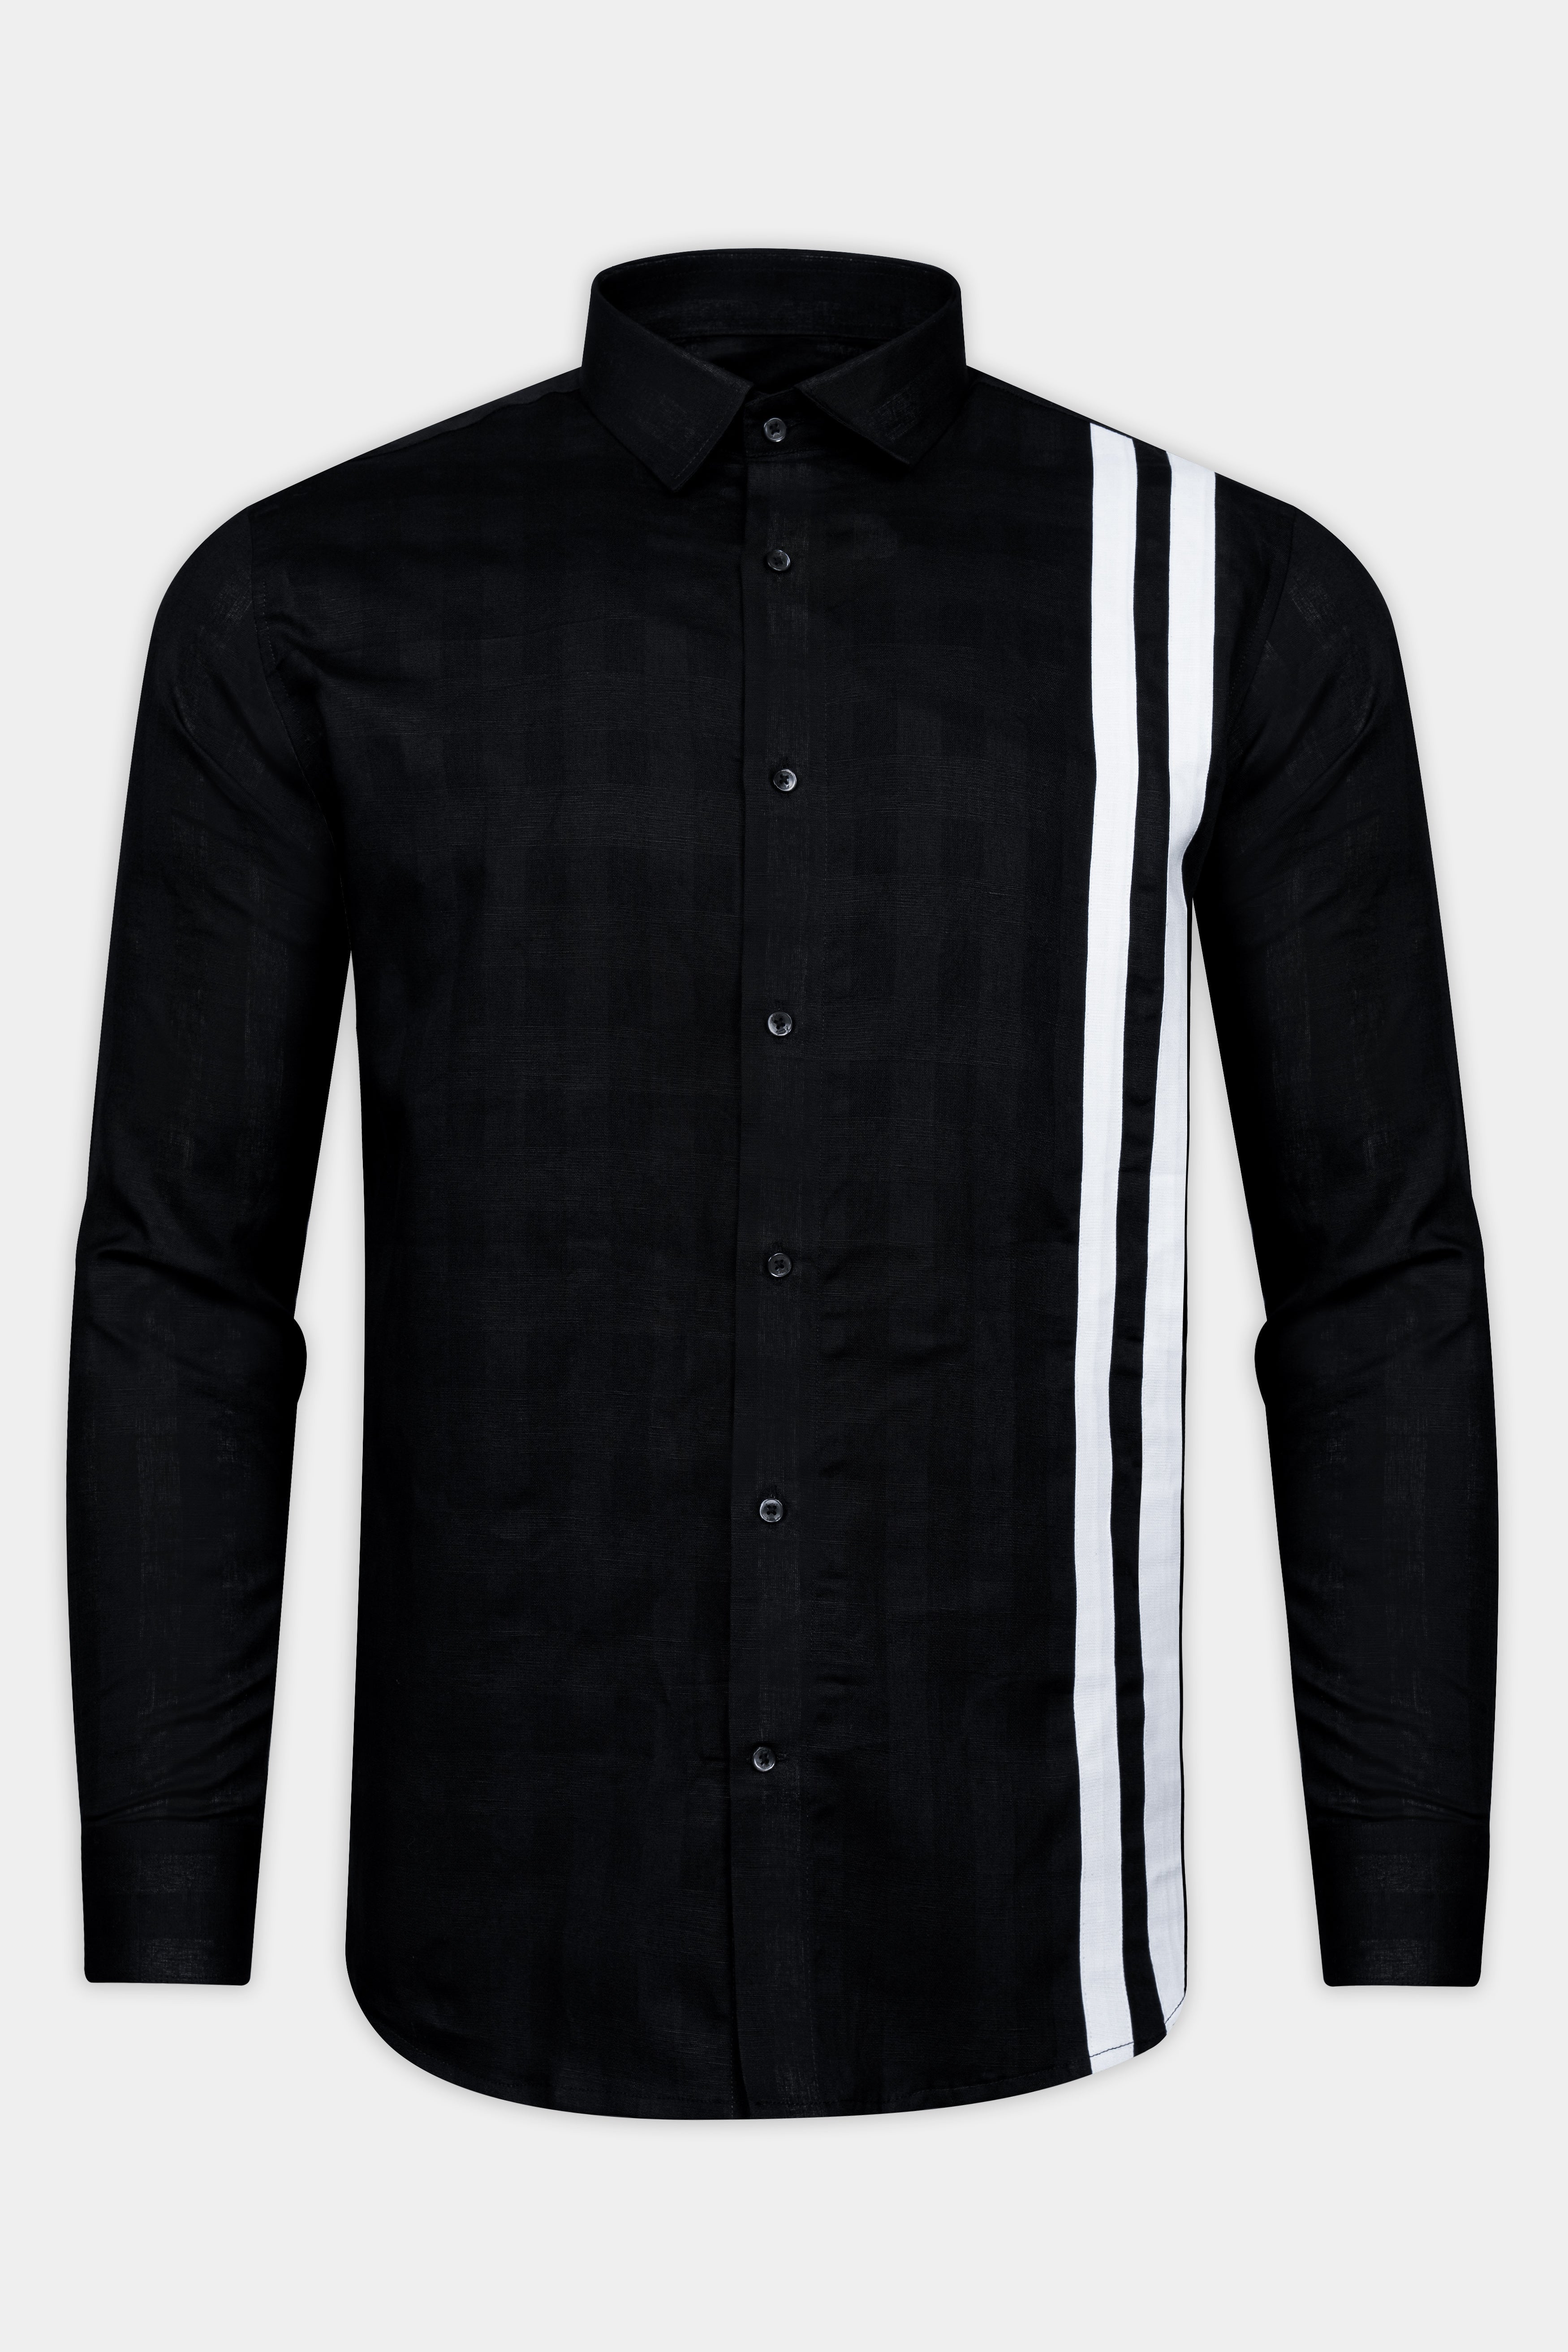 Jade Black with White Double Striped Luxurious Linen Shirt